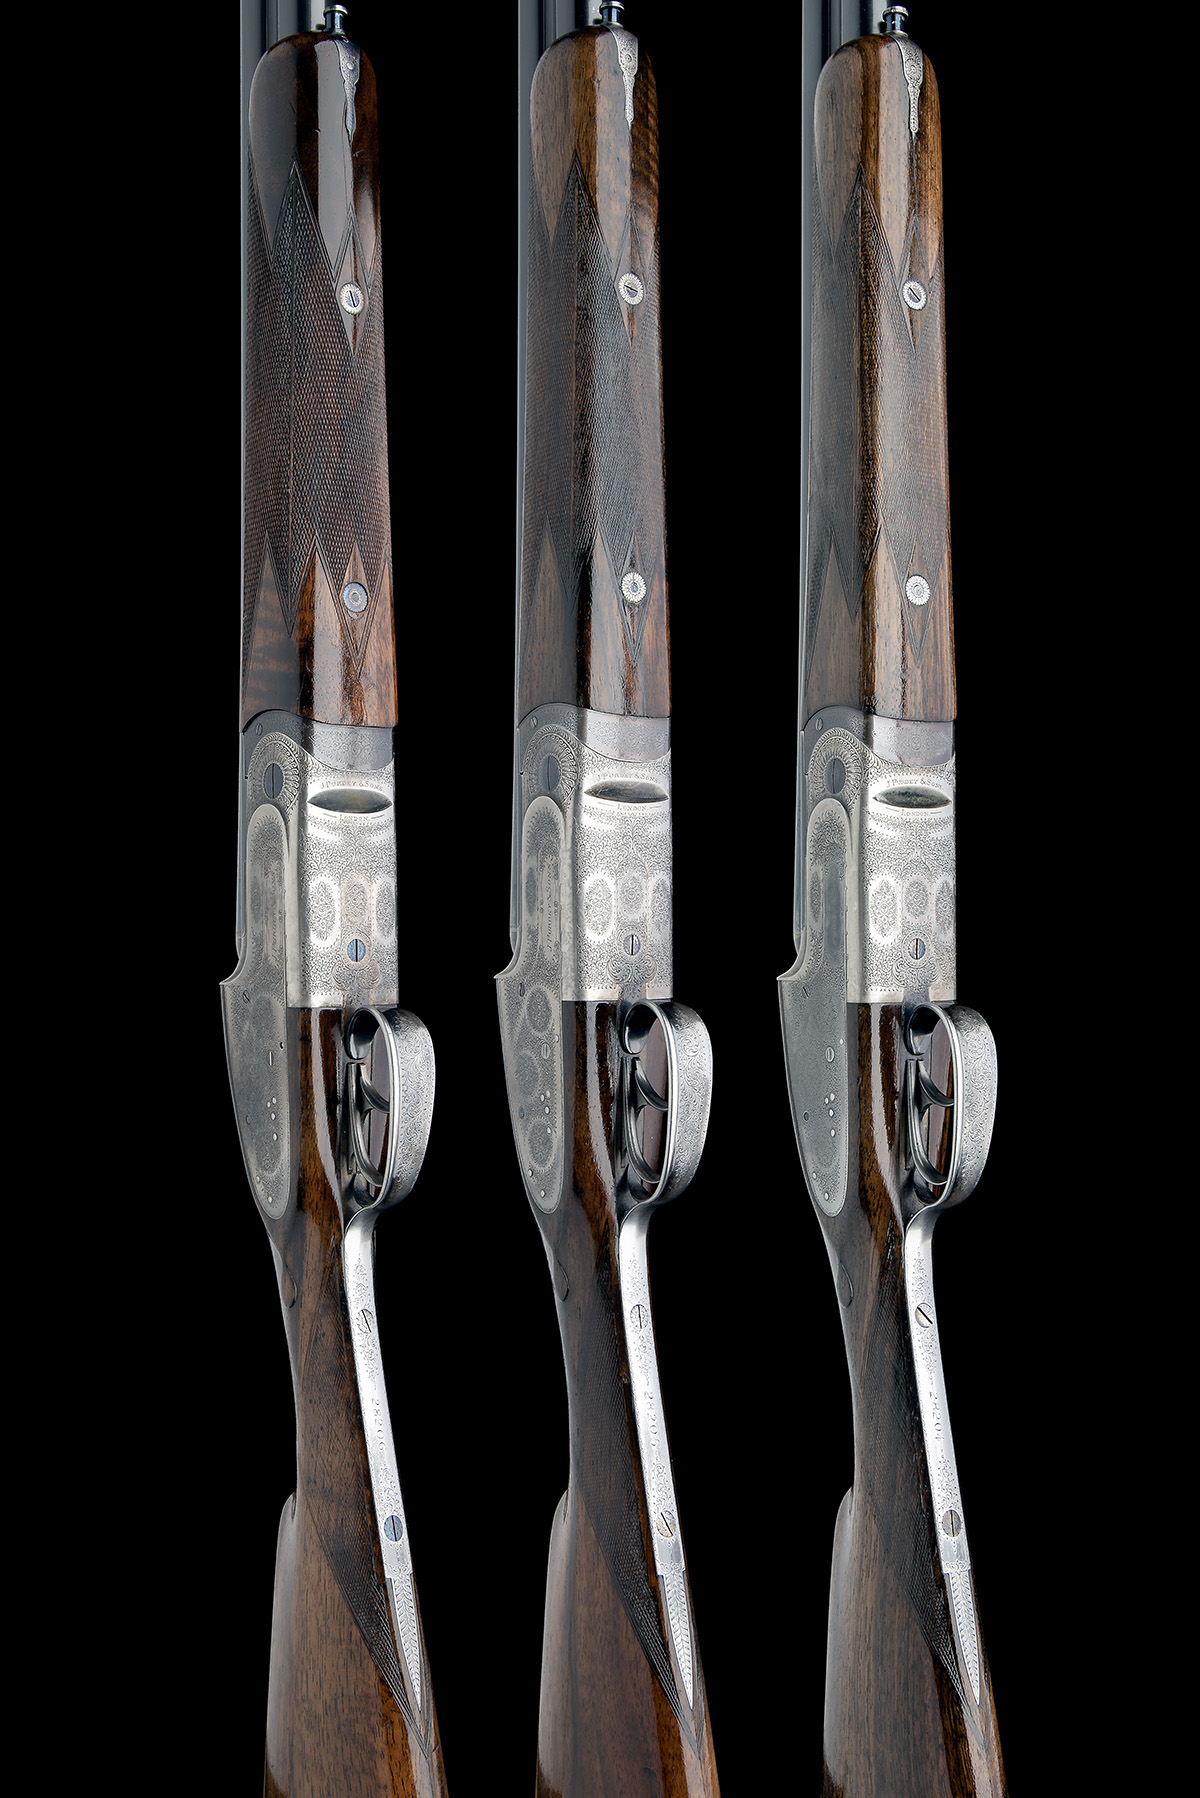 J. PURDEY & SONS A TRIO OF 12-BORE DOUBLE-TRIGGER OVER AND UNDER SIDELOCK EJECTORS, serial no. 28204 - Image 3 of 14